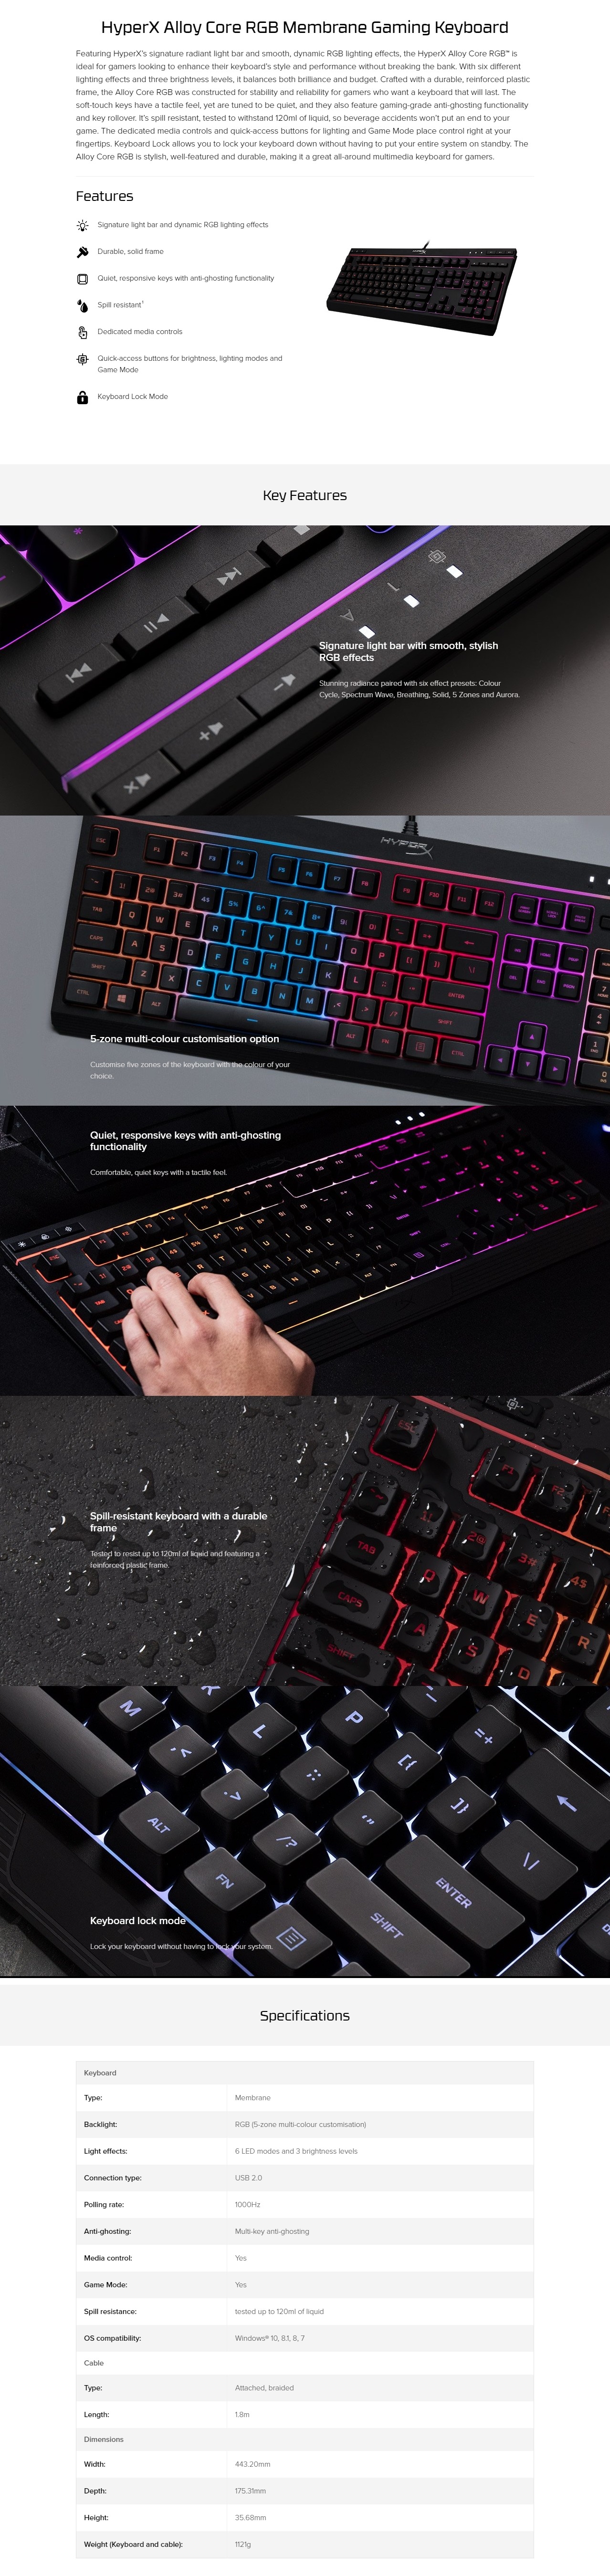 A large marketing image providing additional information about the product HyperX Alloy Core - RGB Gaming Keyboard (Membrane) - Additional alt info not provided